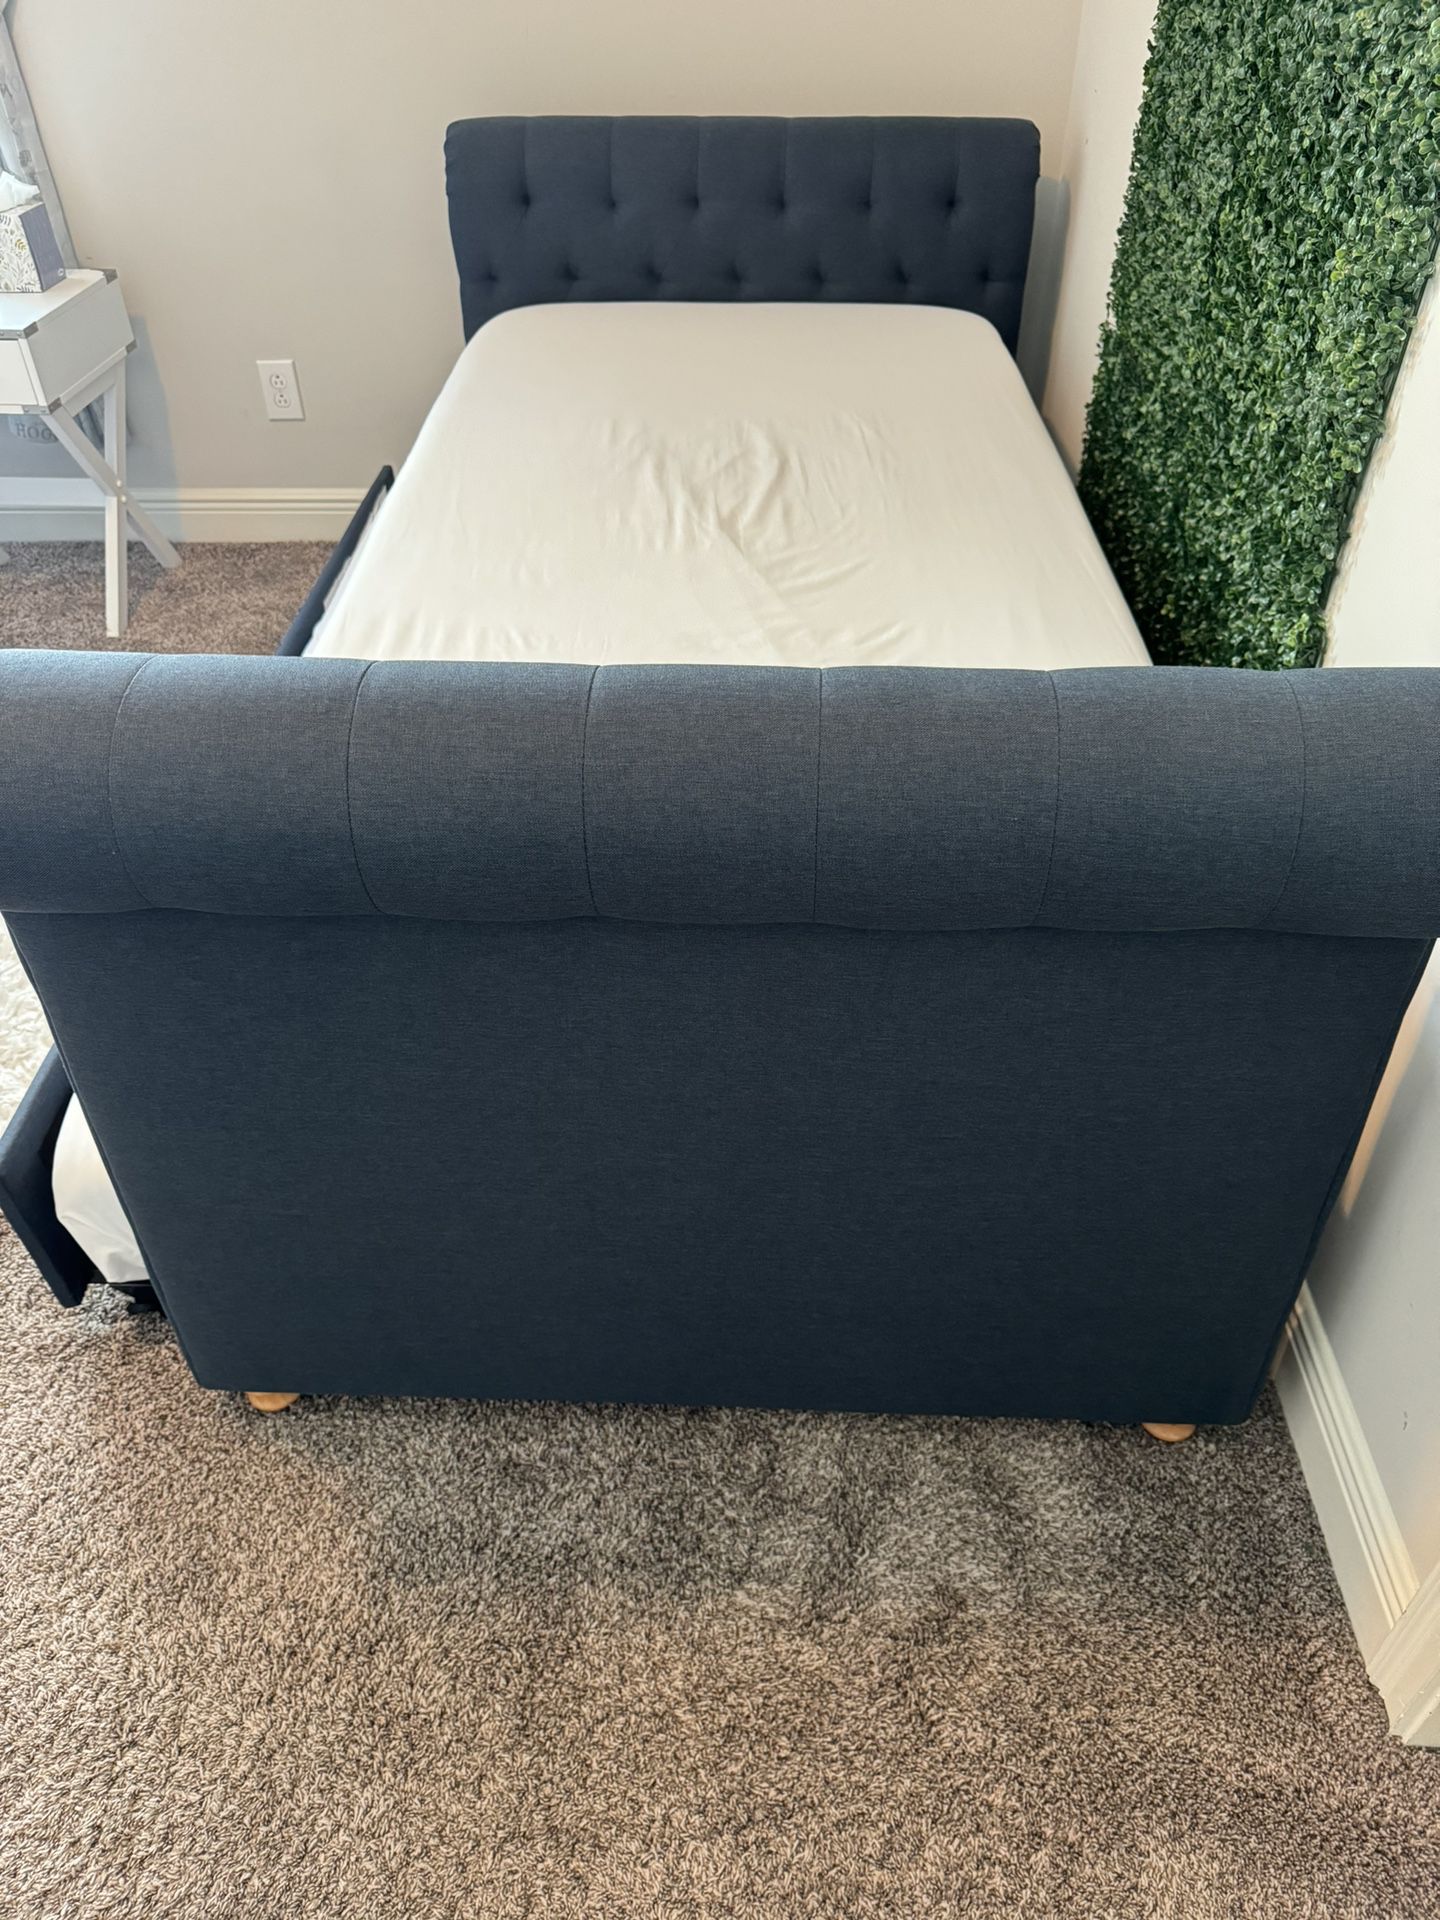 Twin Bed With Trundle And Mattresses 